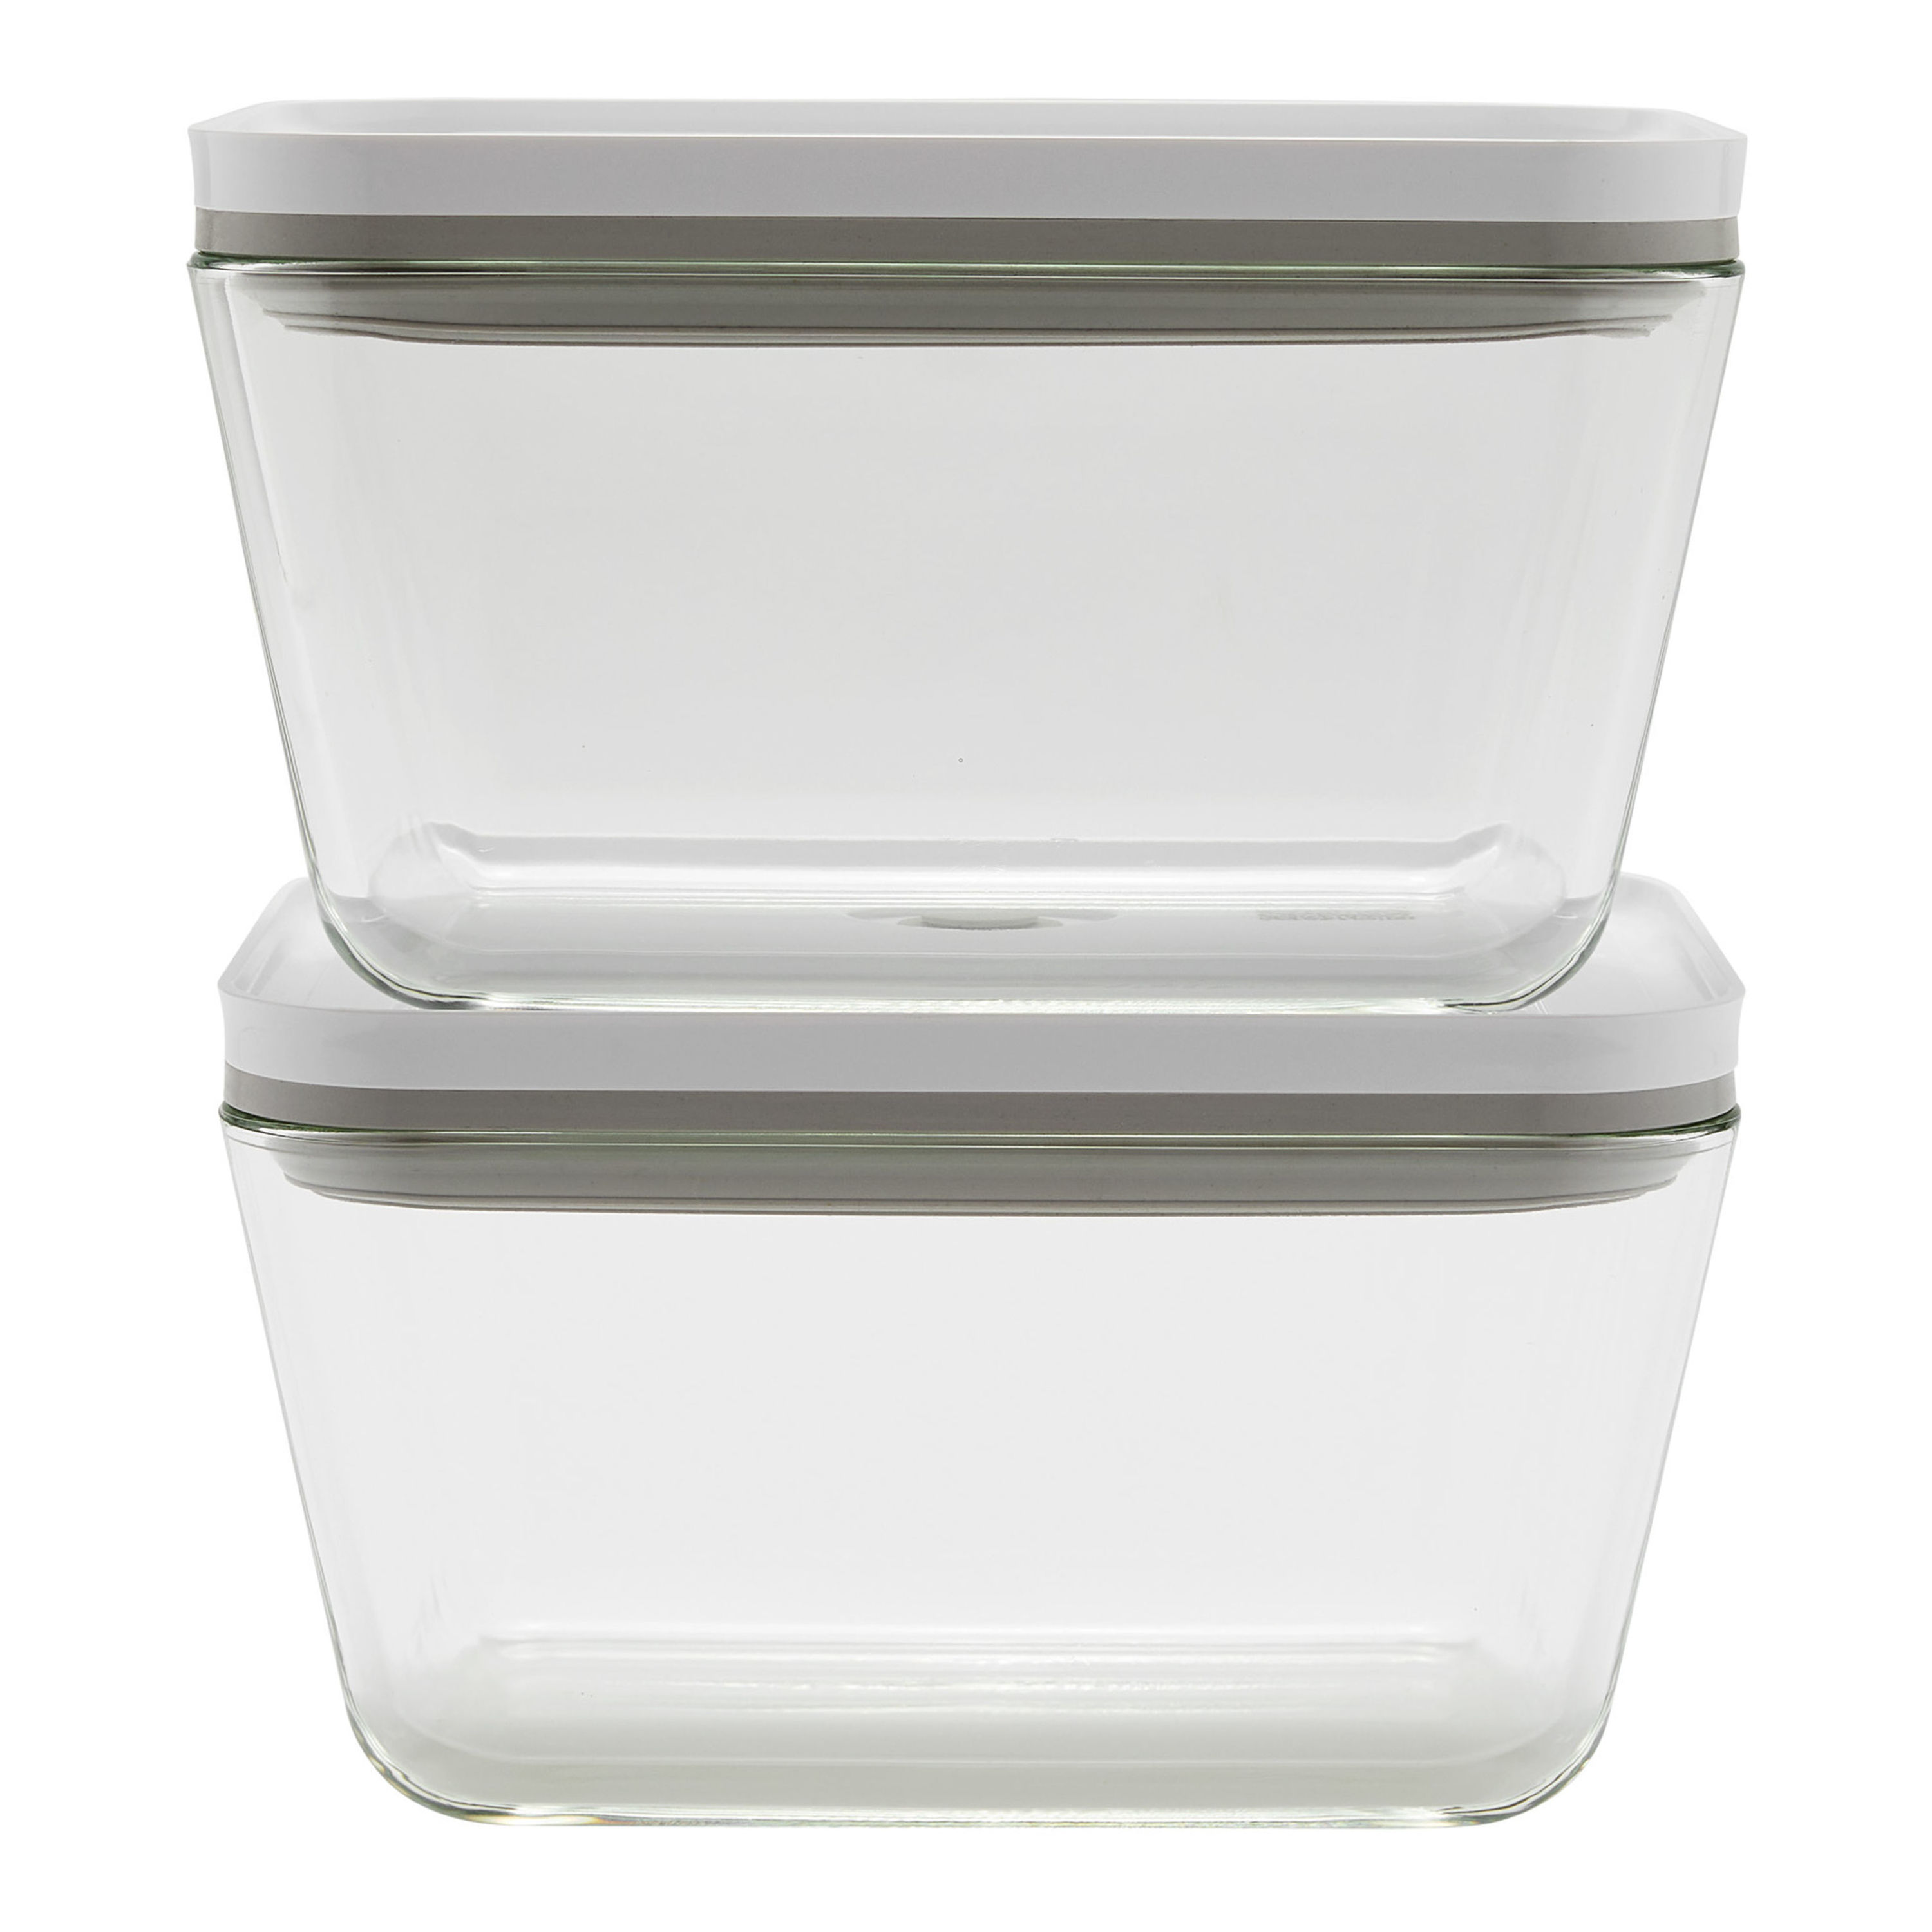 Airtight Food Storage Containers by Simply Gourmet. 7-Piece Kitchen Storage BPA